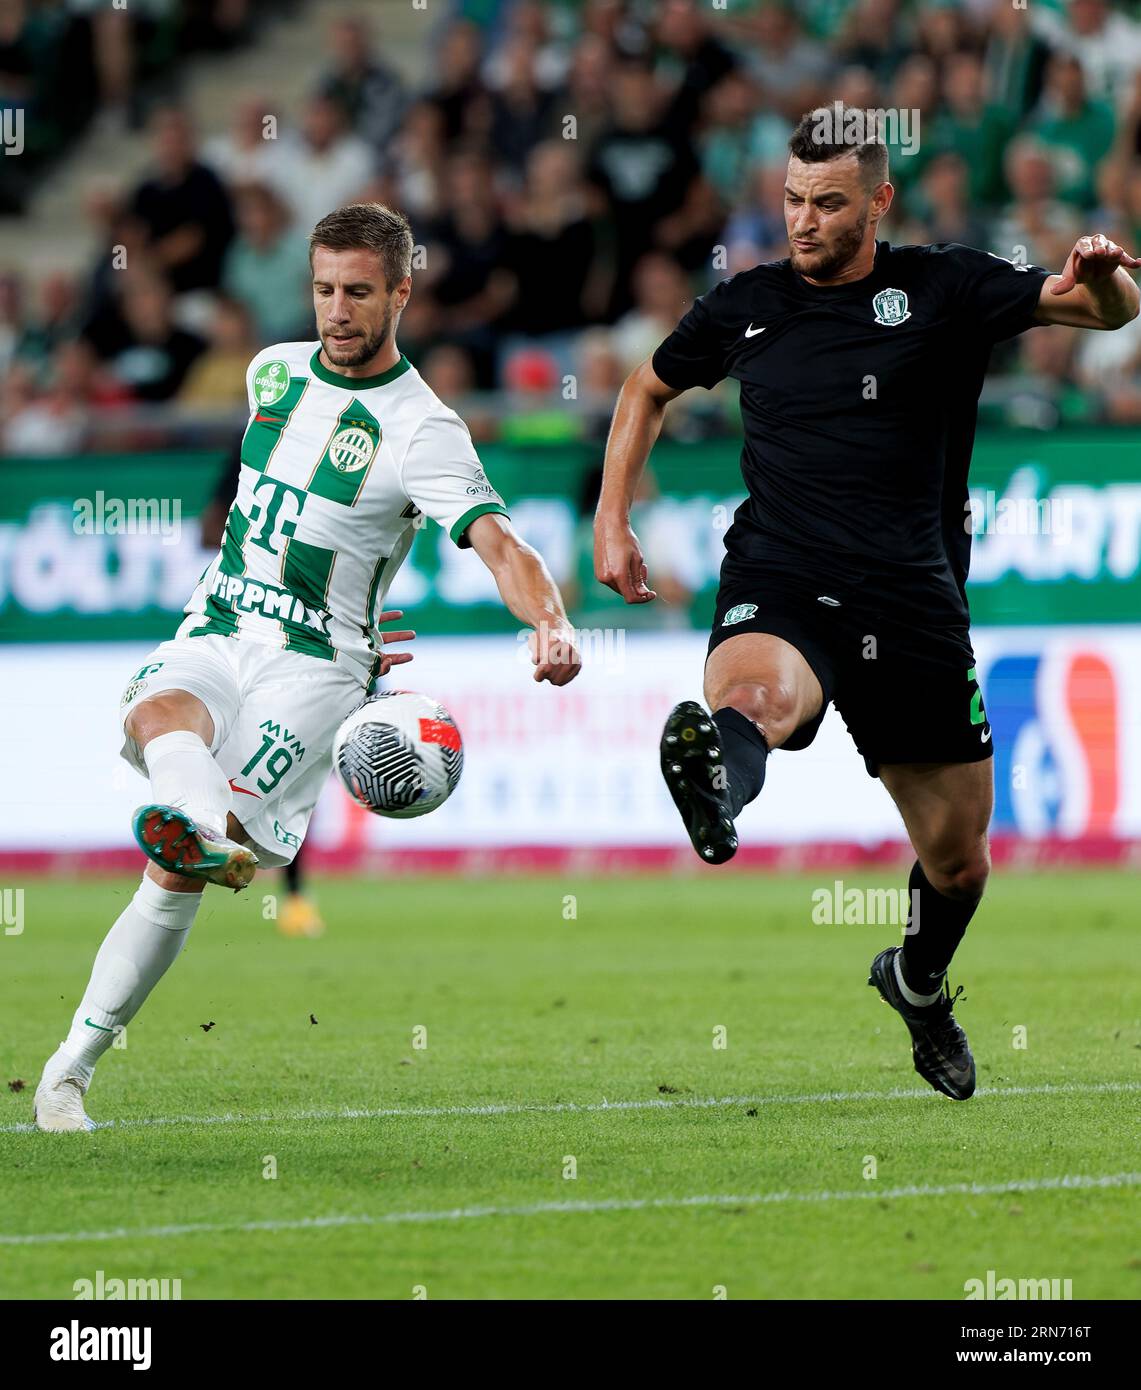 Budapest, Hungary. 31st August, 2023. Nassim Hnid of FK Zalgiris Vilnius tries to block the shot from Barnabas Varga of Ferencvarosi TC during the UEFA Europa Conference League Play Off Round Second Leg match between Ferencvarosi TC and FK Zalgiris Vilnius at Groupama Arena on August 31, 2023 in Budapest, Hungary. Credit: Laszlo Szirtesi/Alamy Live News Stock Photo